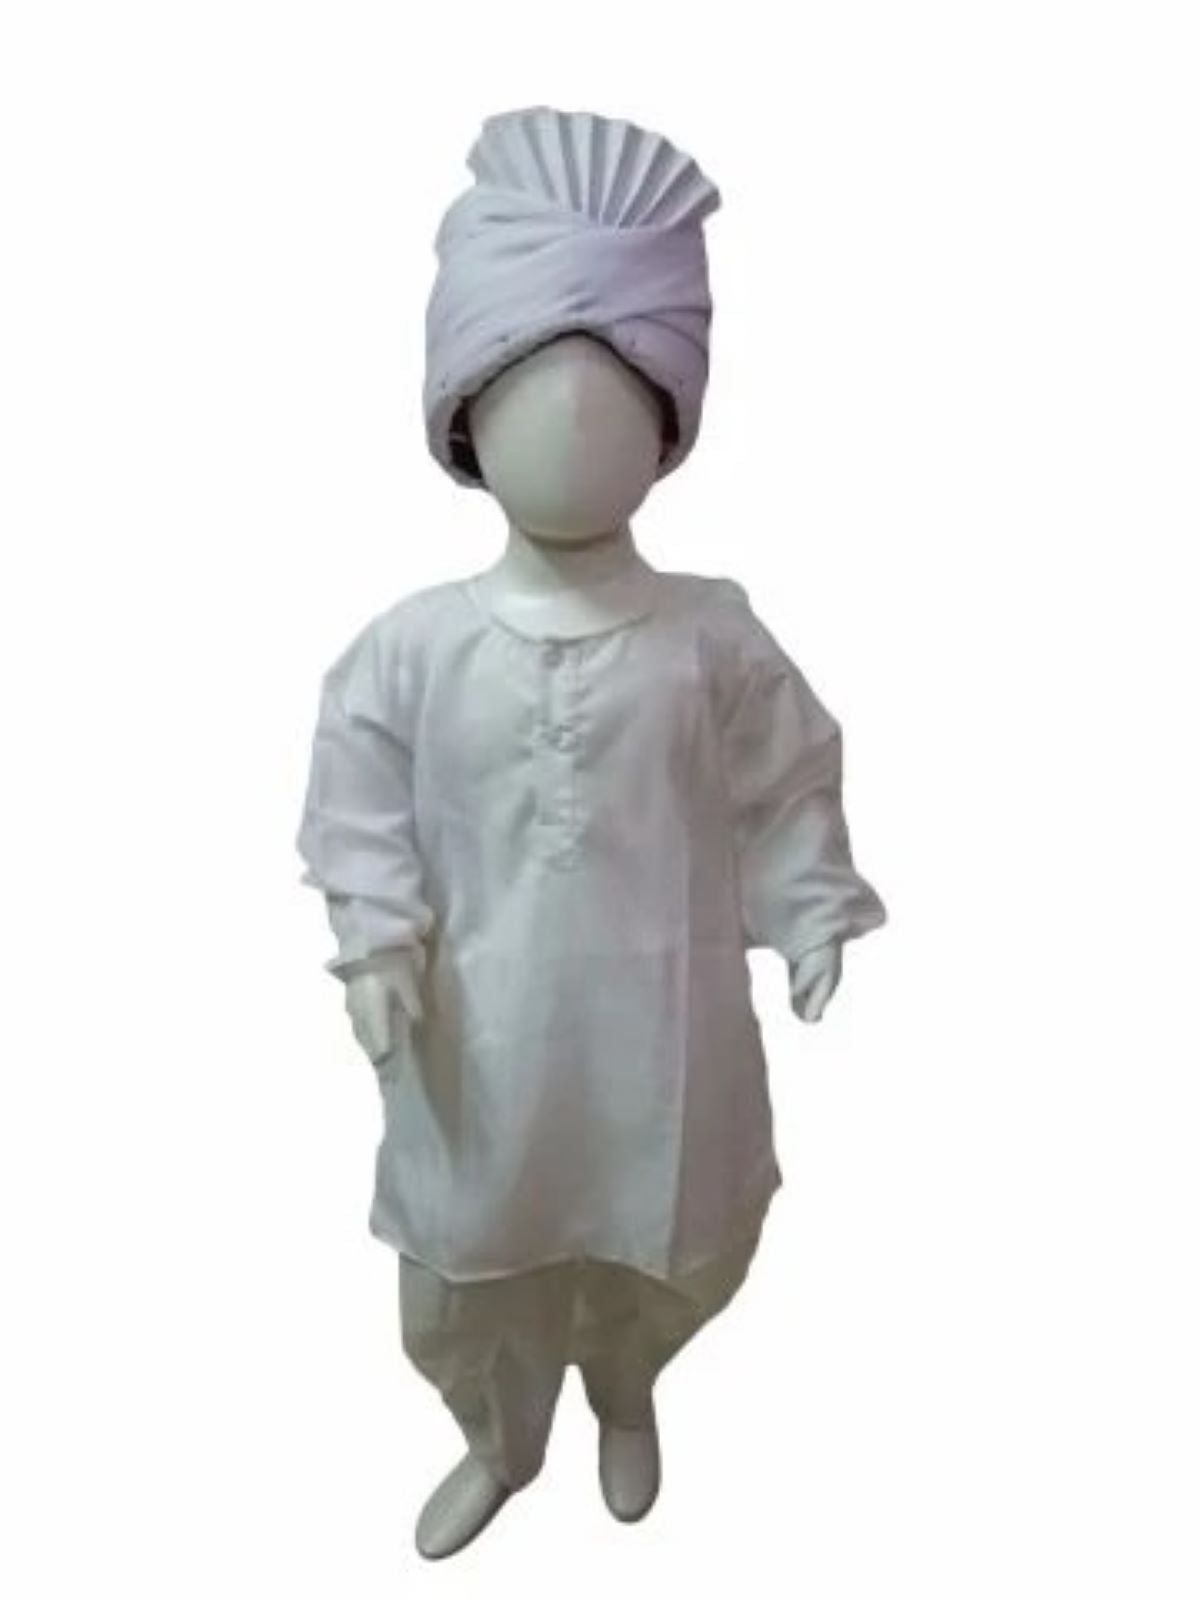 Buy Kaku Fancy Dresses Boy's Polyester Bengali Dress (White, 3-4 Years)  Online at Low Prices in India - Amazon.in